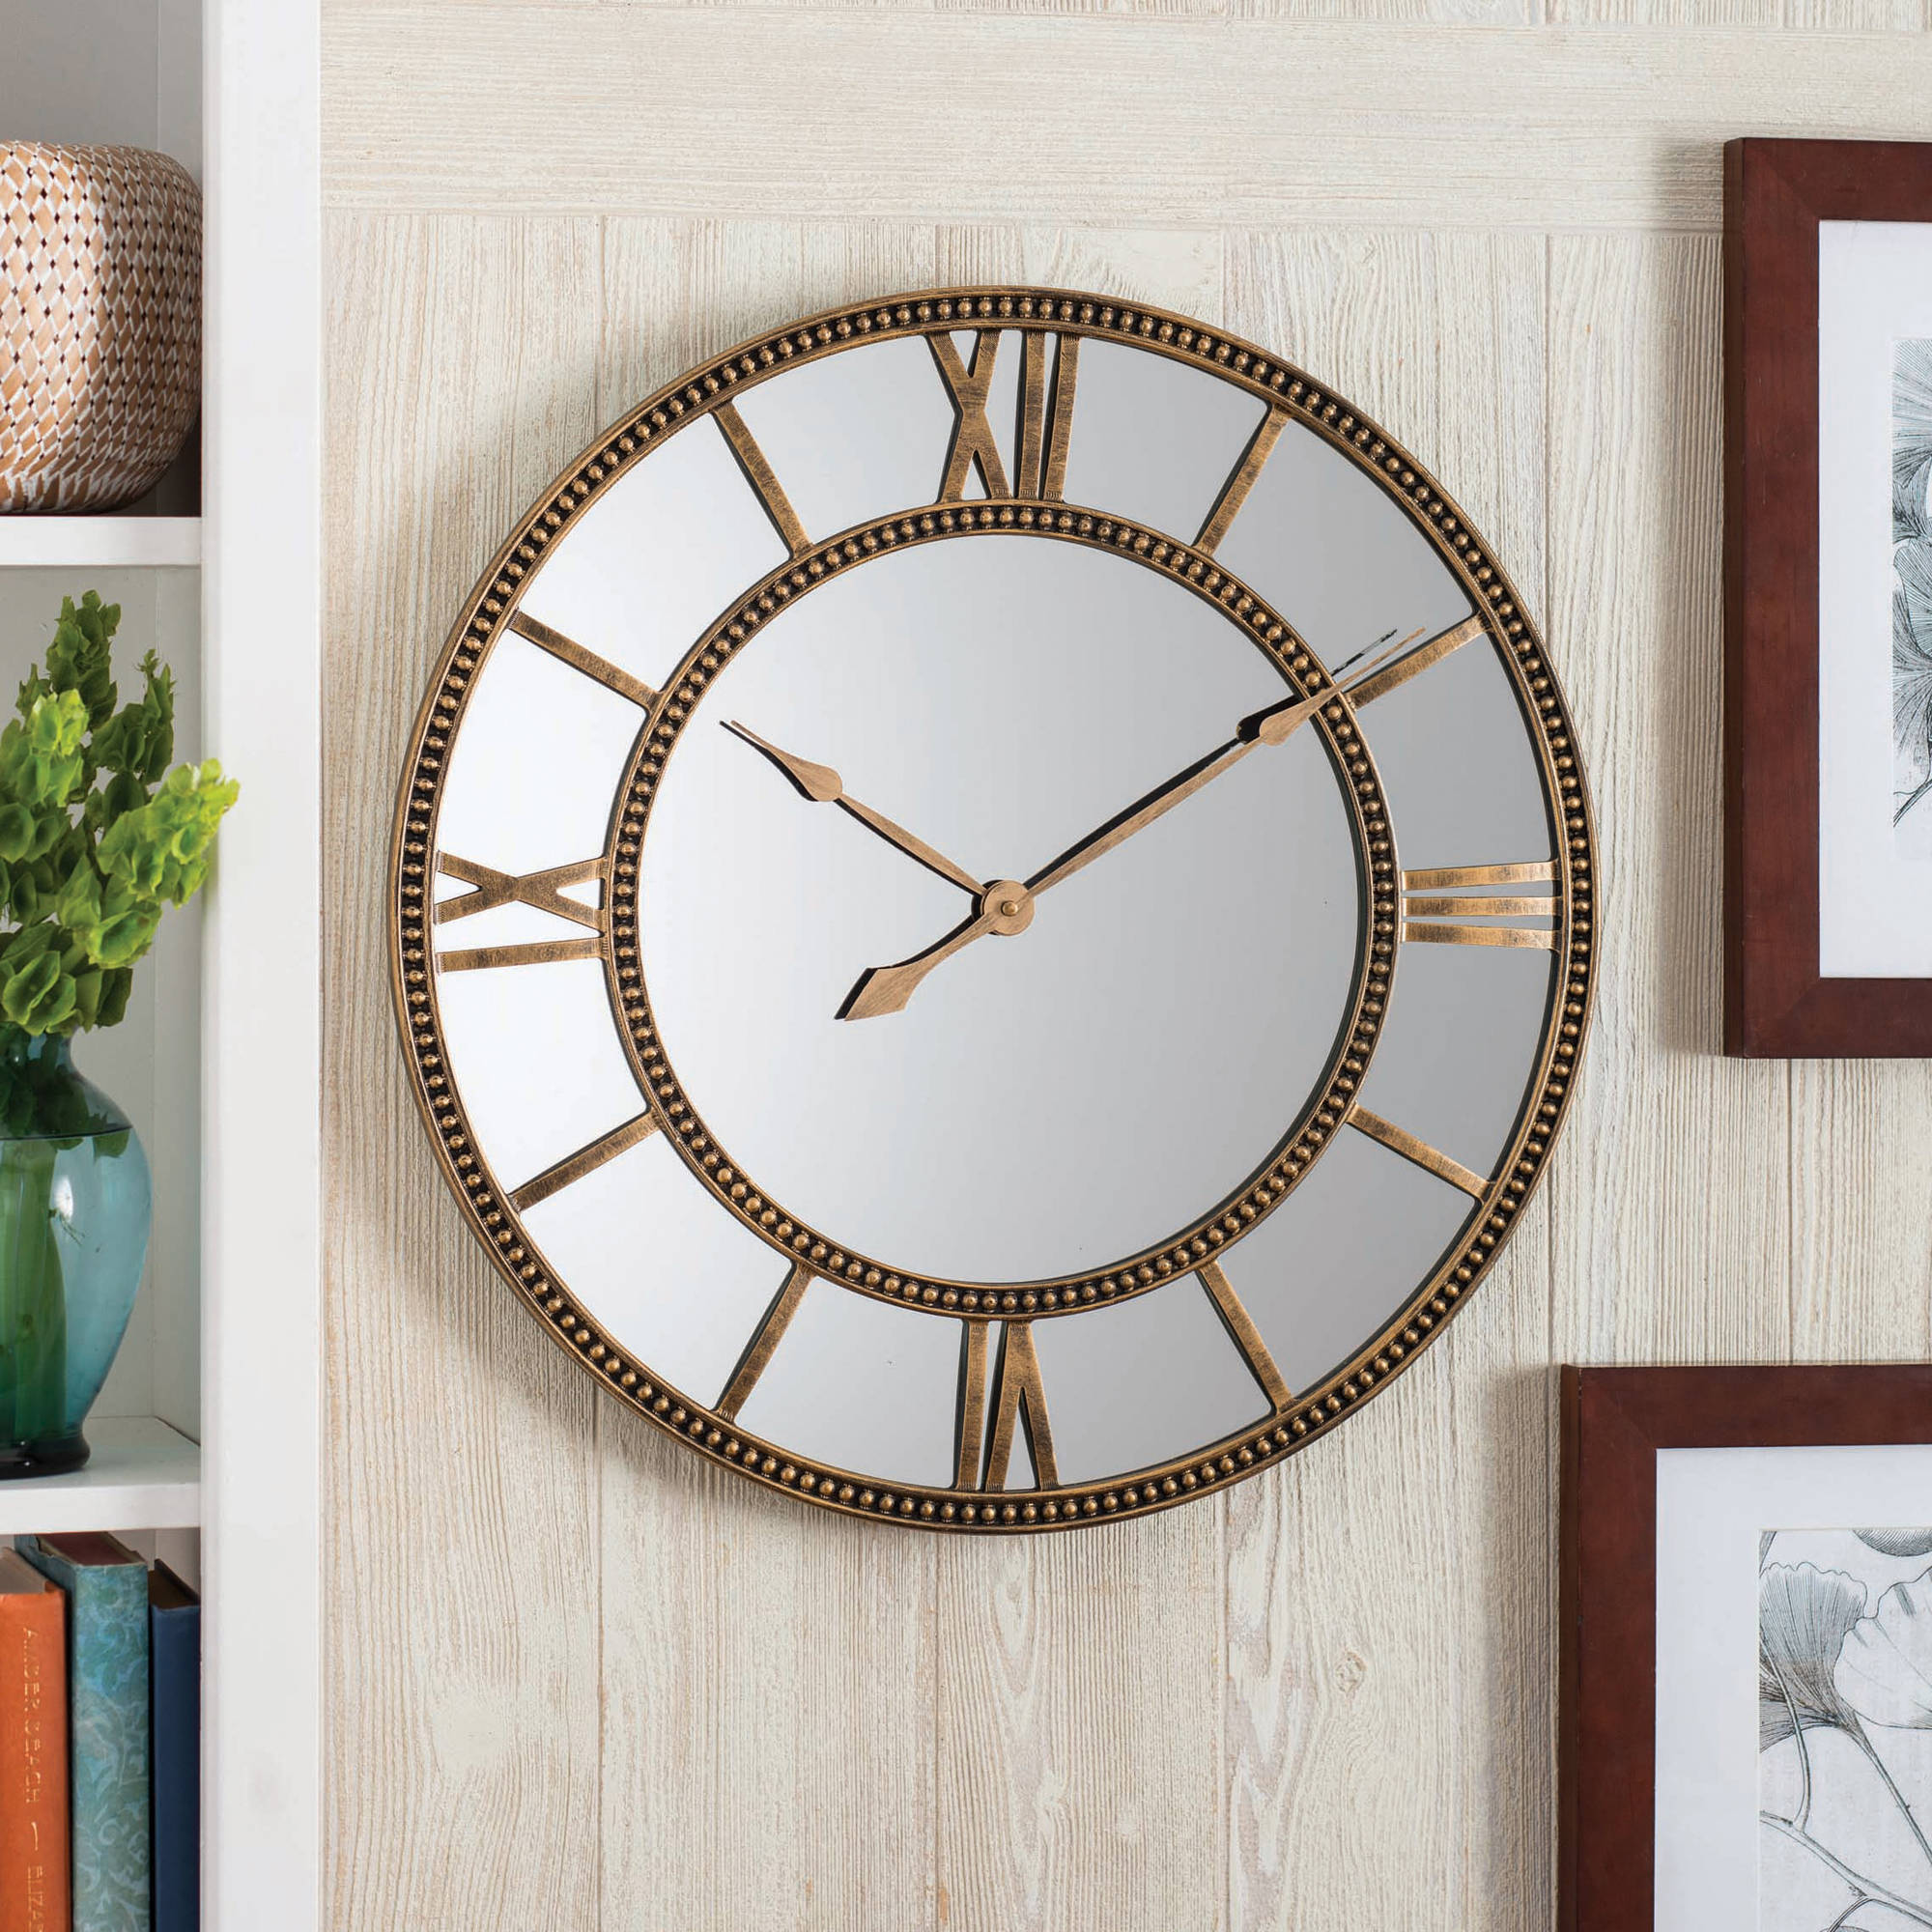 Better Homes&gardens Wall Clock - image 1 of 4